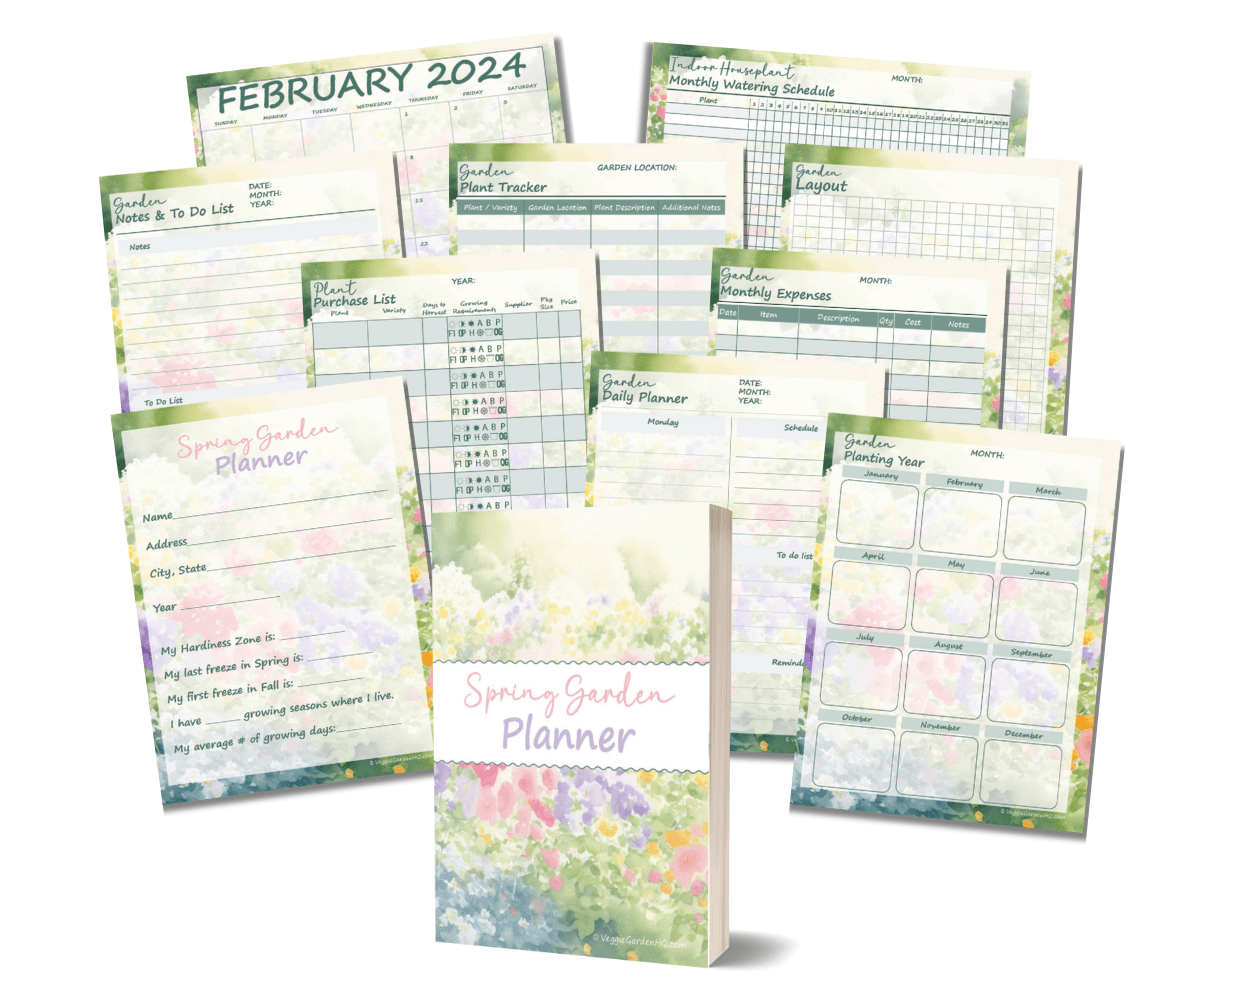 Spring garden planner and pictures of pages included